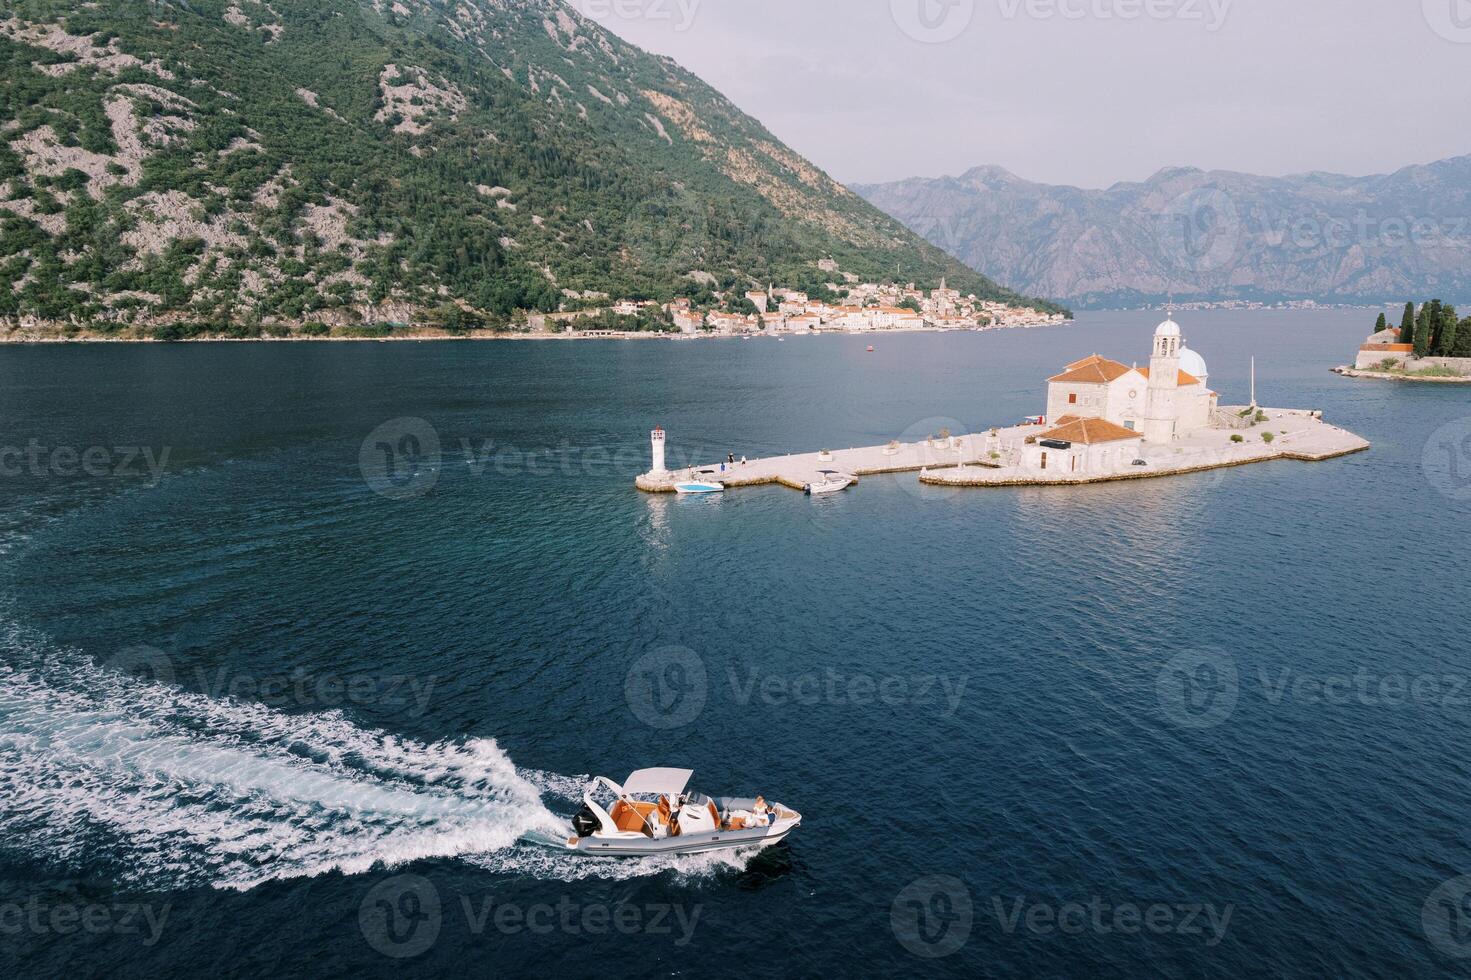 Motorboat sails on the sea past the Church of Our Lady on the Rocks of the island of Gospa od Skrpjela. Montenegro. Drone photo